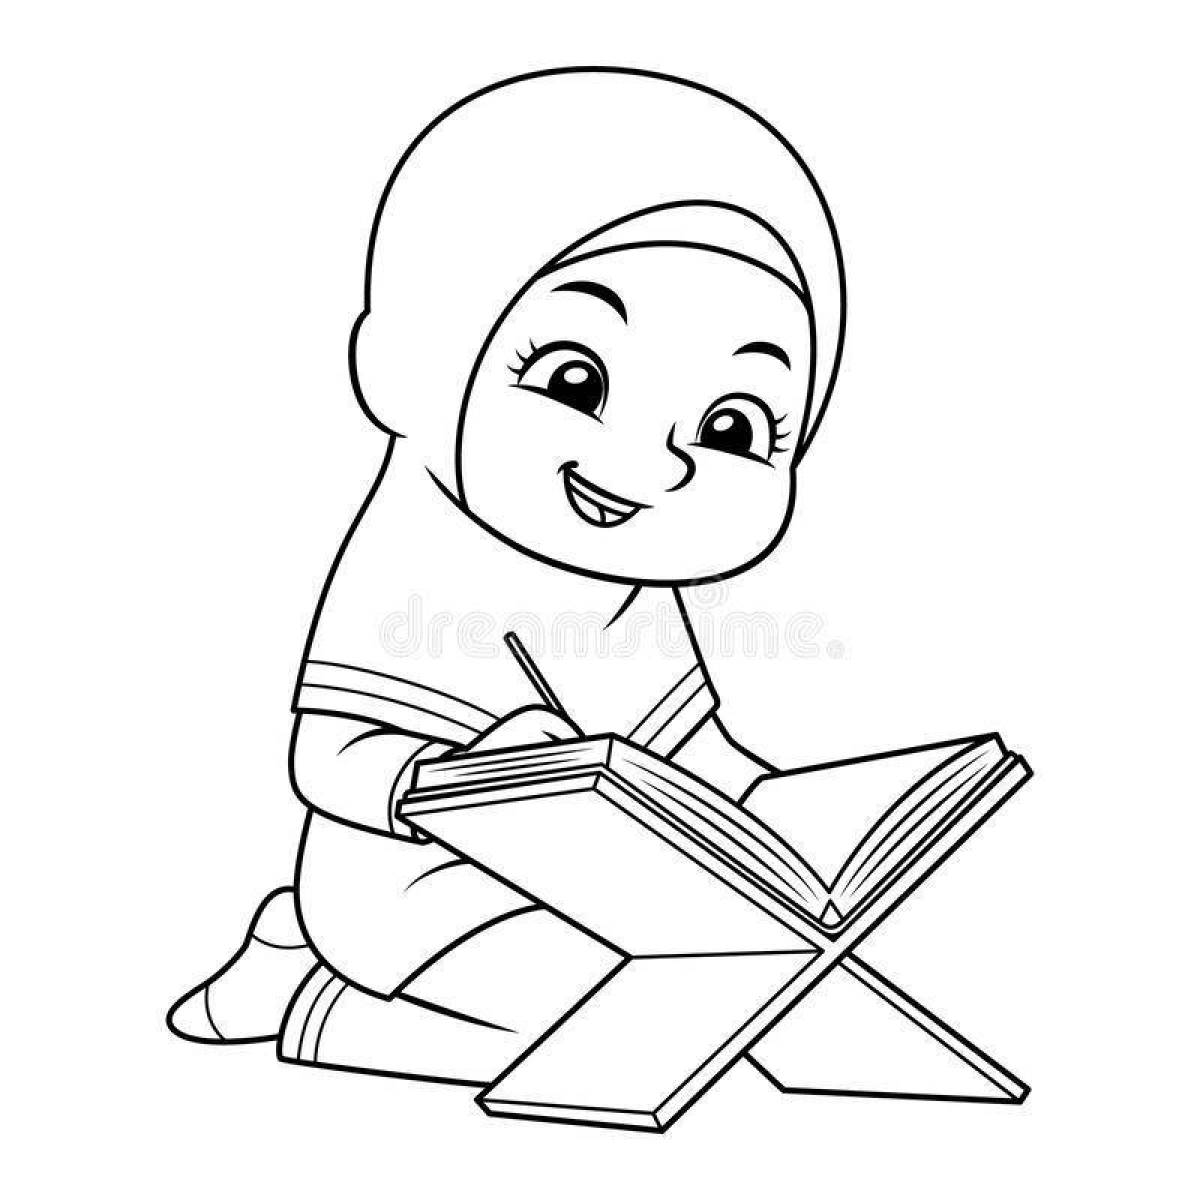 Colorful quran coloring page